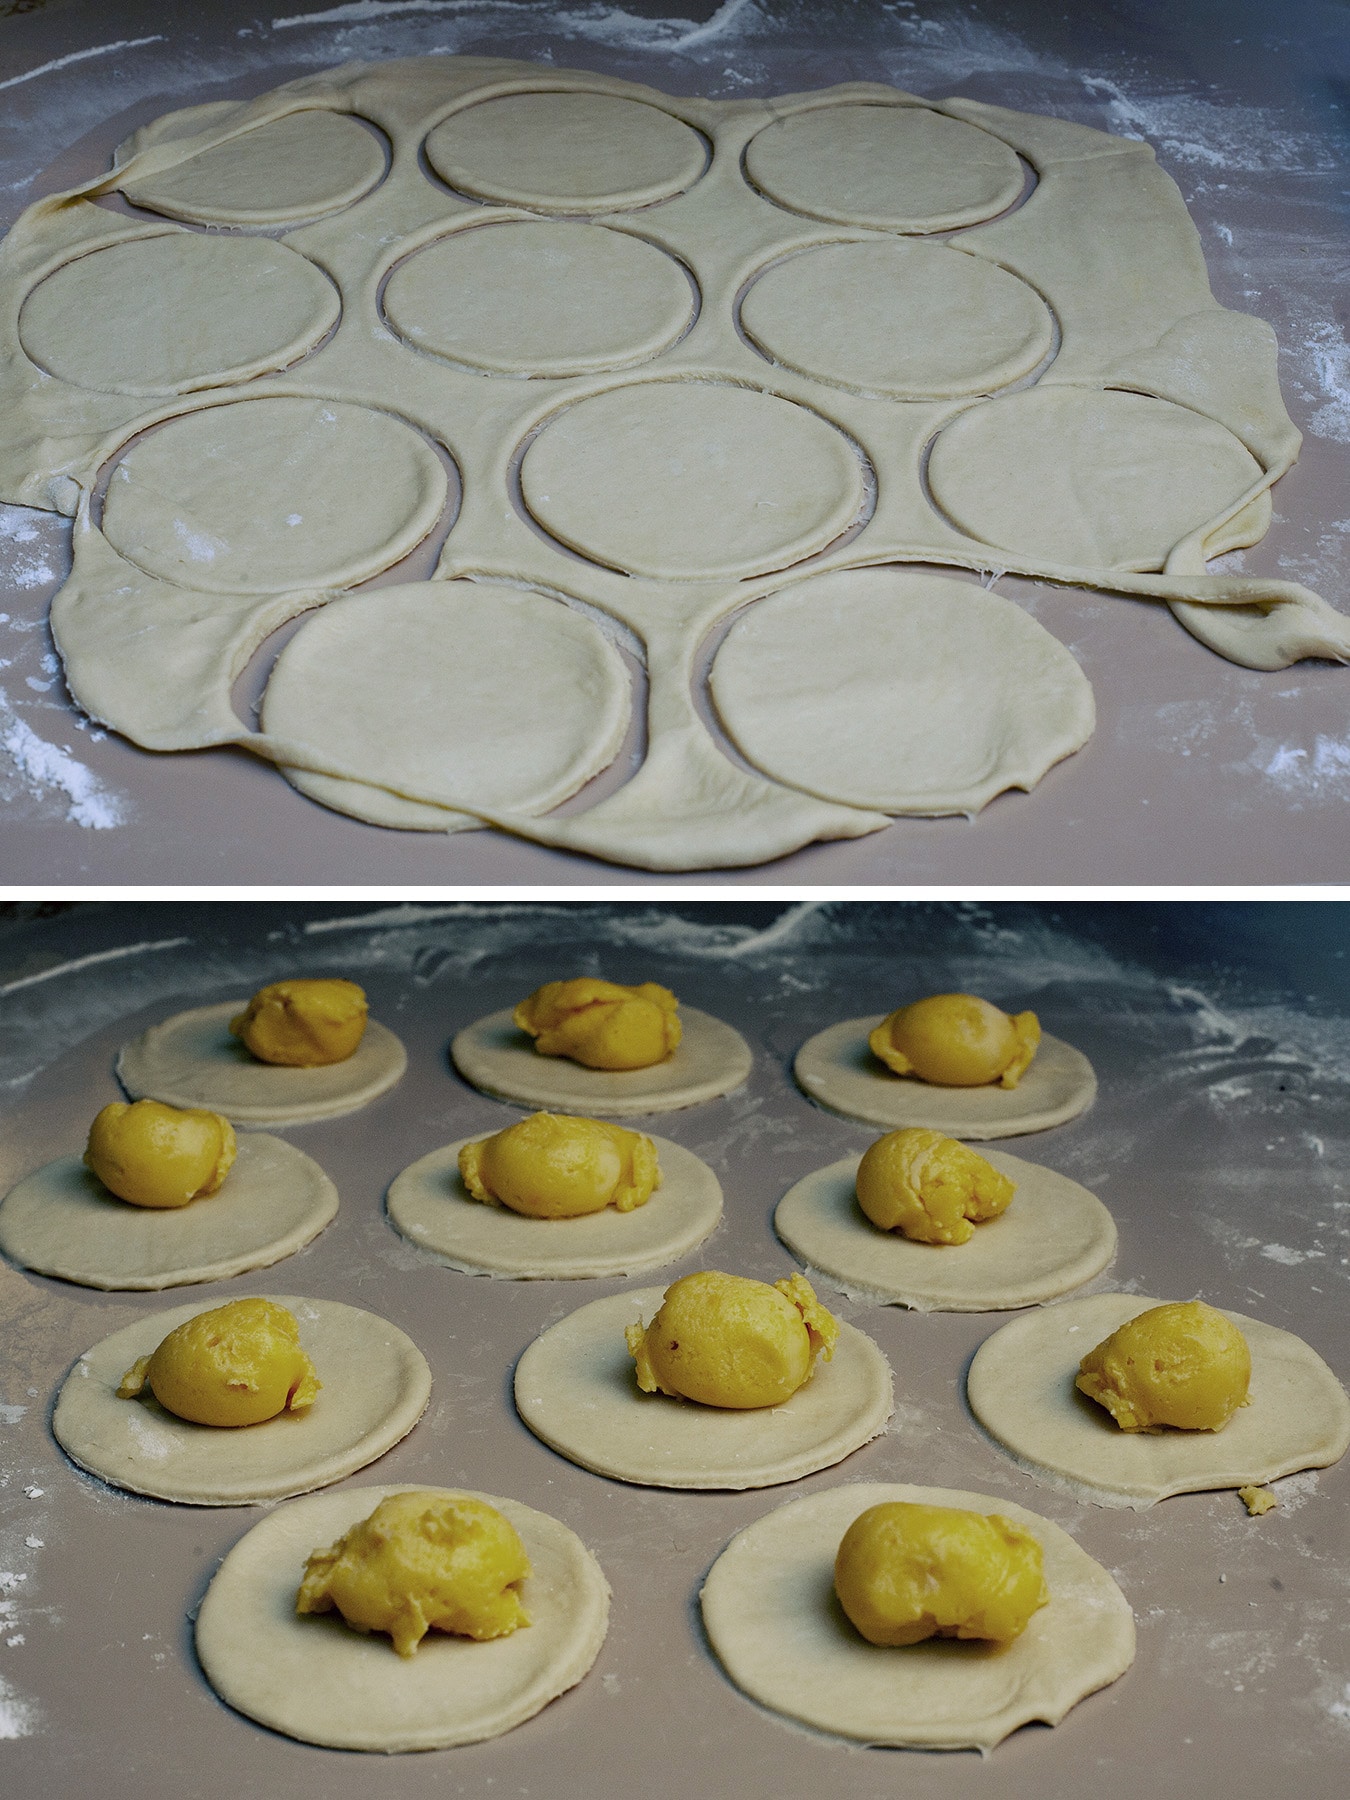 A two part image showing rounds cut from perogy dough, with and without balls of cheesy potato filling on each.